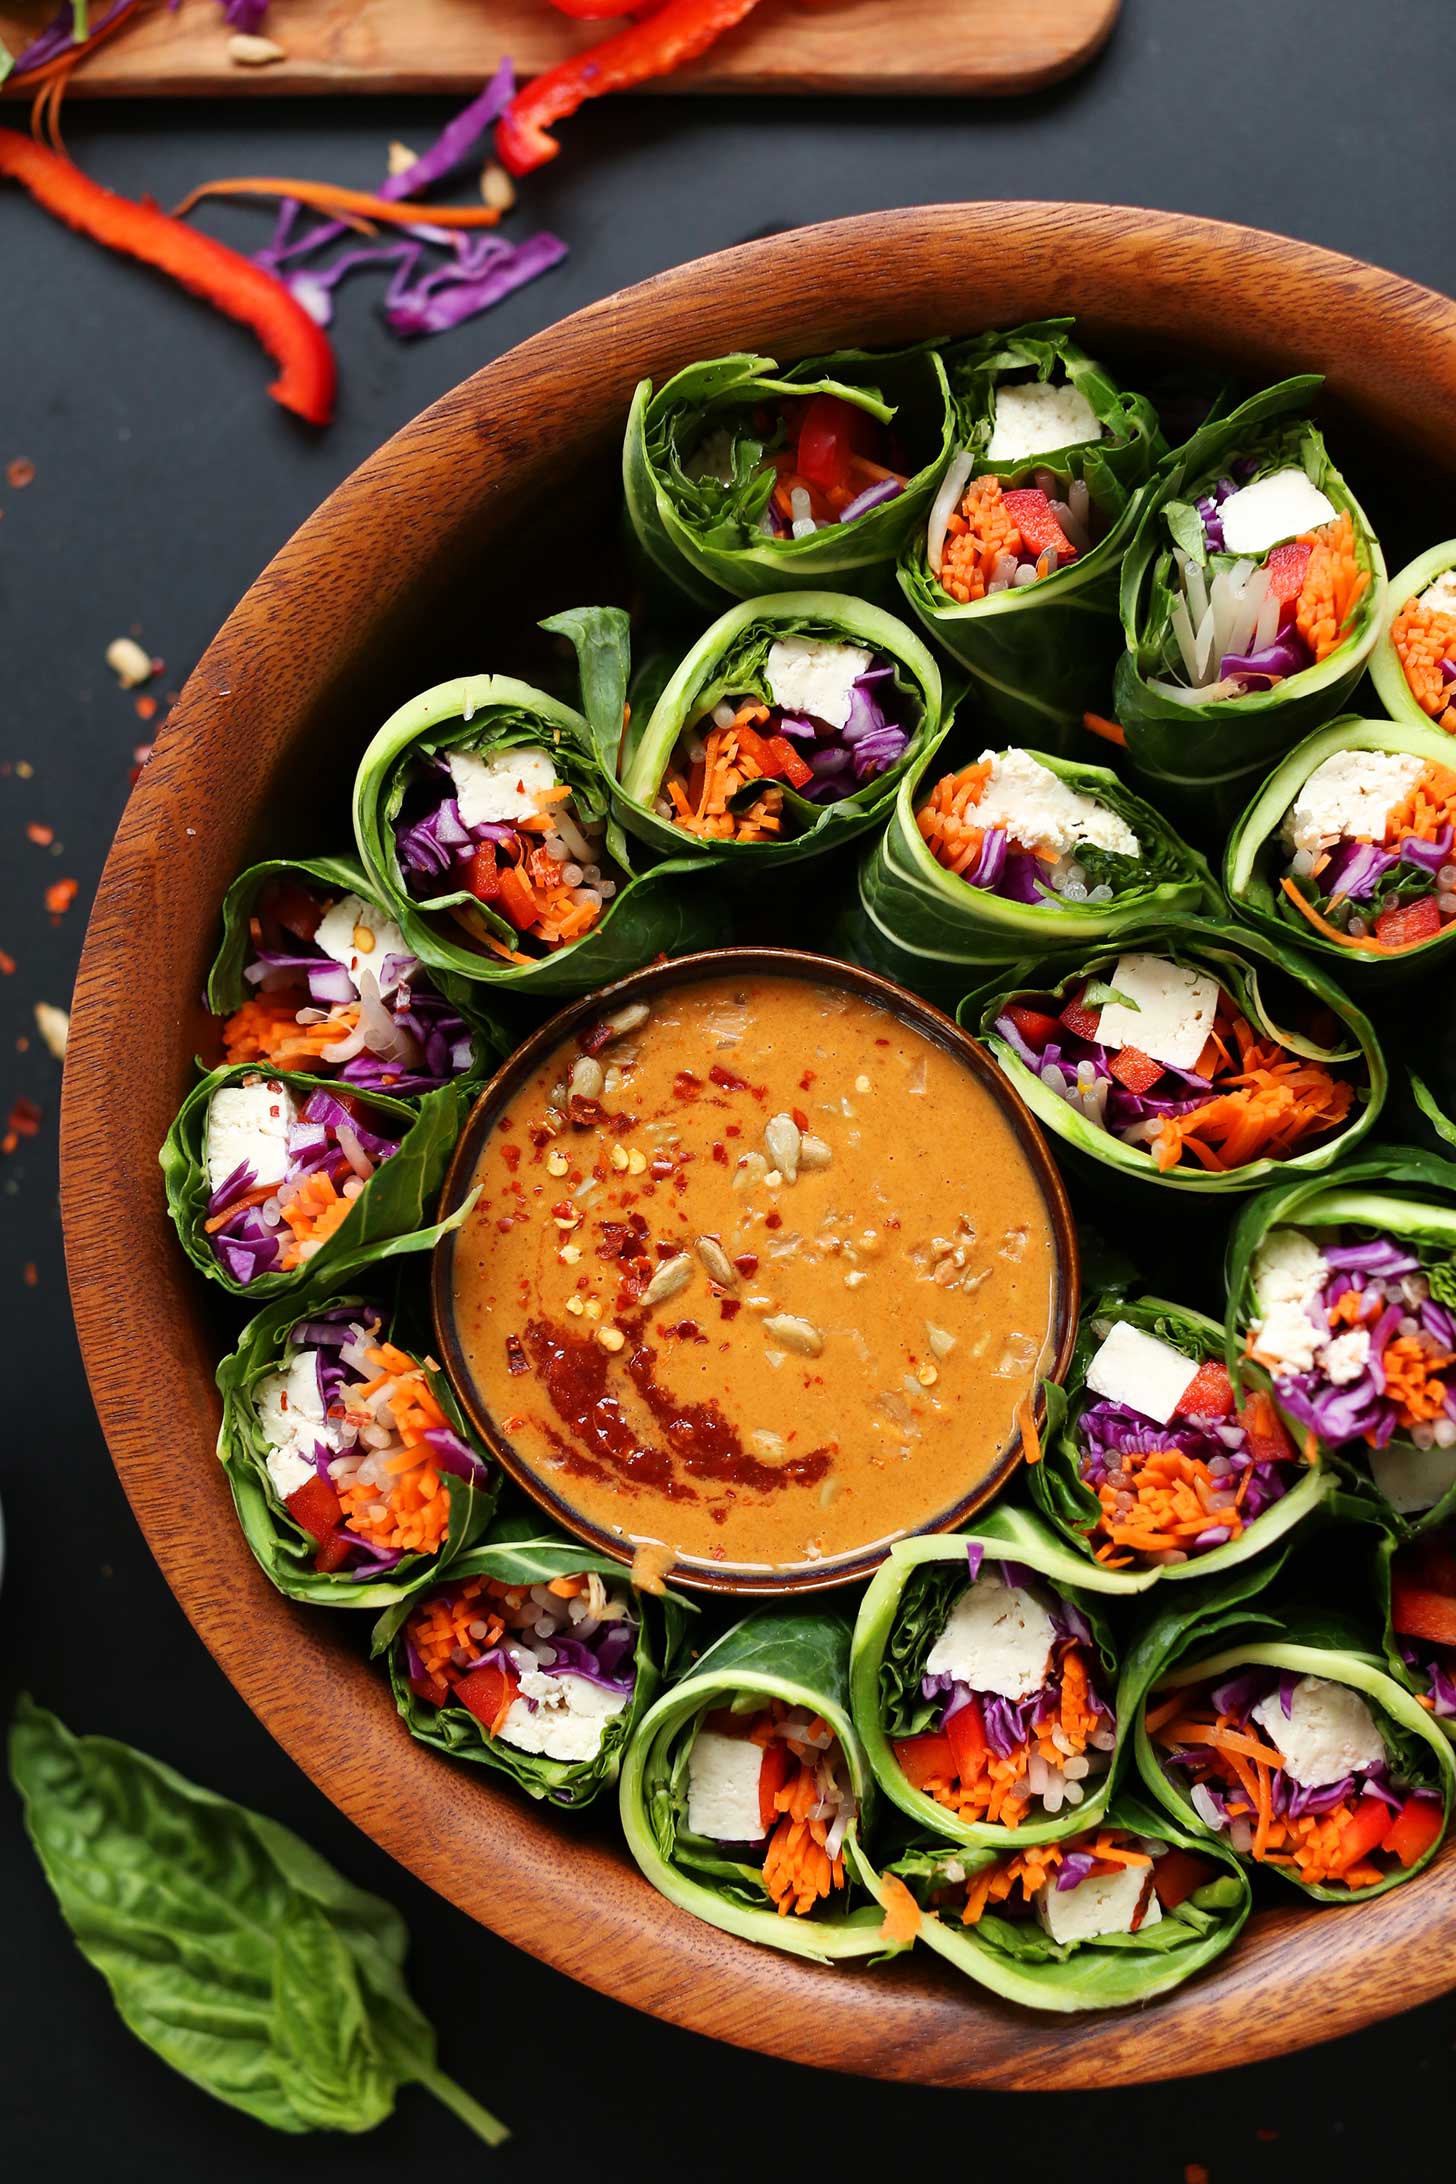 Bowl full of Amazing Collard Green, Veggie, and Tofu Spring Rolls with Sunbutter Dipping Sauce for a tasty plant-based meal